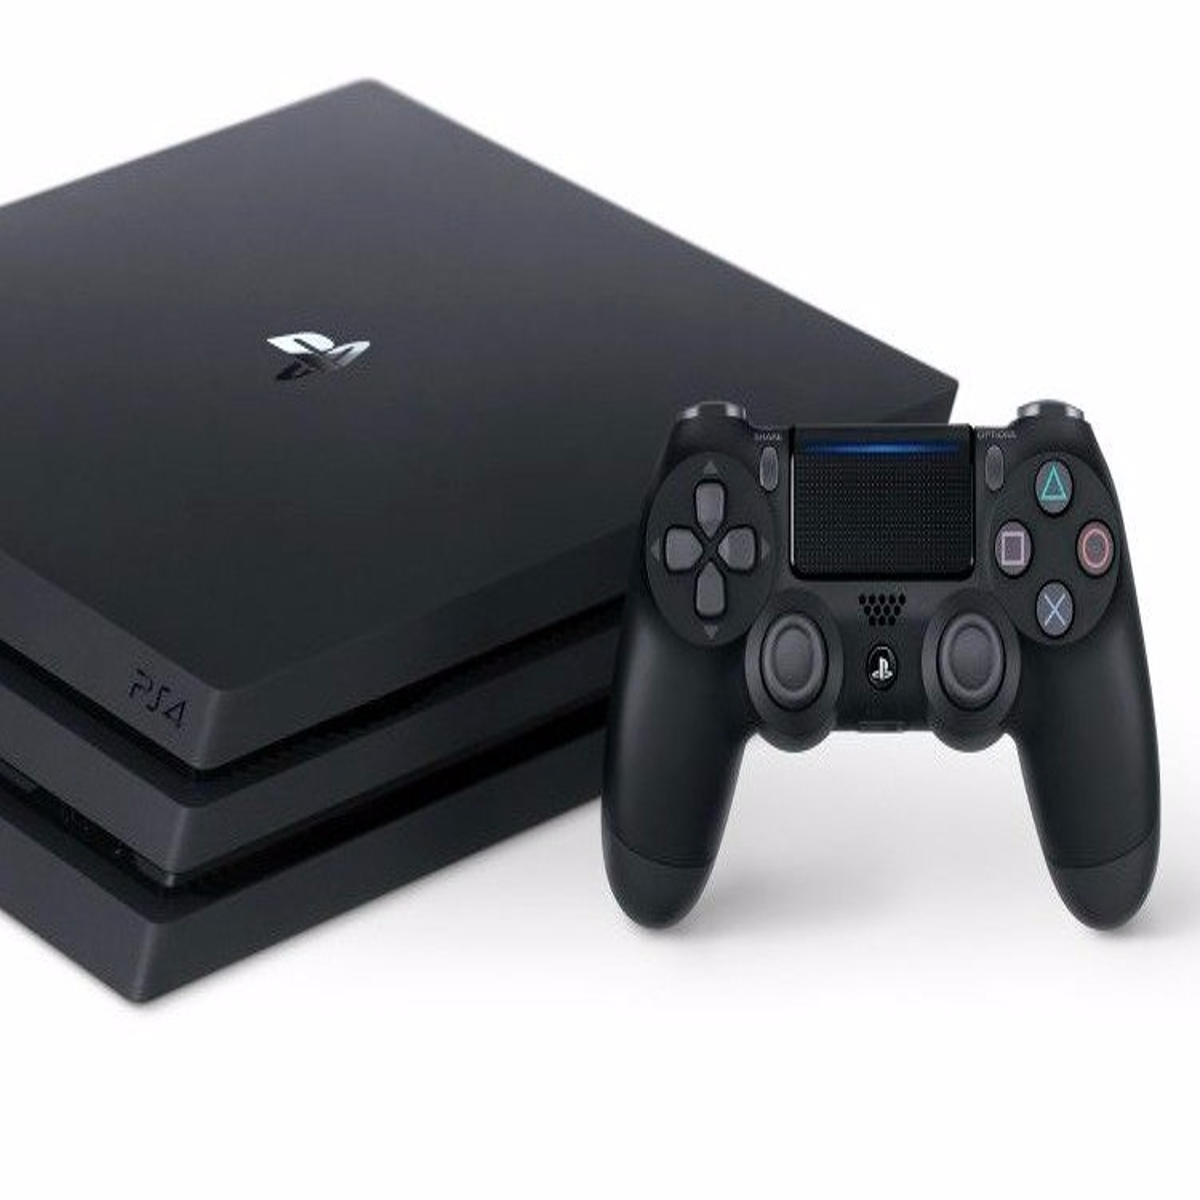 The 1TB PS4 Pro drops to $349 on